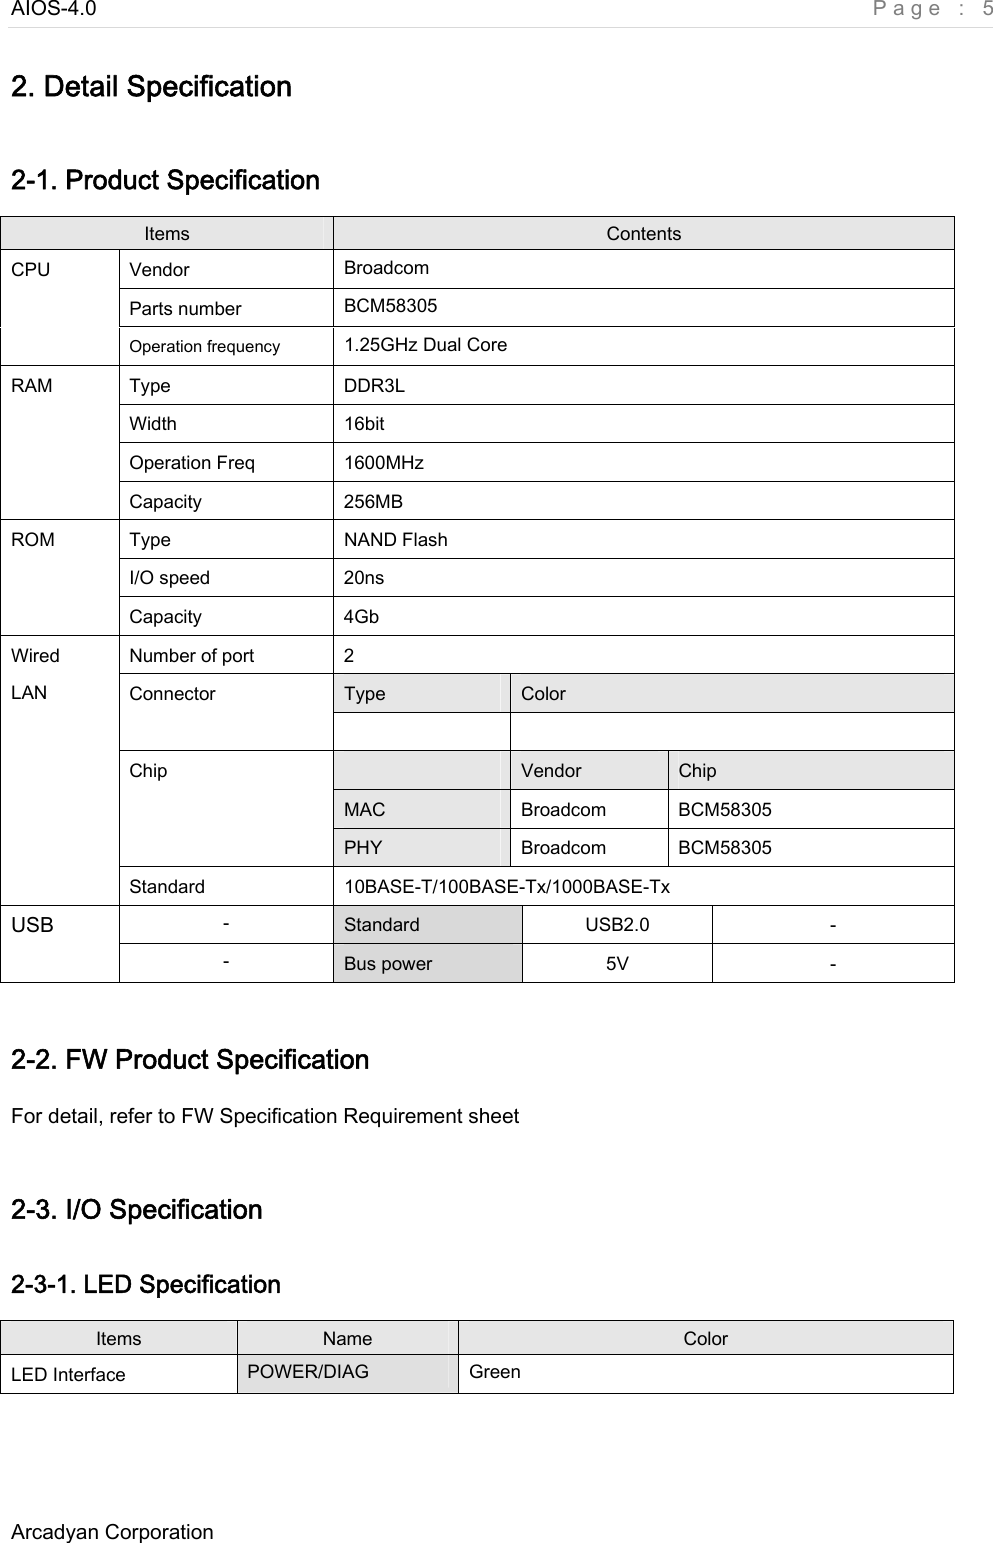 AIOS-4.0    Page : 5 Arcadyan Corporation     2. Detail Specification 2-1. Product Specification Items  Contents Vendor  Broadcom Parts number  BCM58305 CPU   Operation frequency  1.25GHz Dual Core Type  DDR3L Width  16bit Operation Freq  1600MHz RAM   Capacity  256MB Type  NAND Flash I/O speed  20ns ROM Capacity  4Gb Number of port  2 Type  Color Connector    Vendor  Chip MAC  Broadcom  BCM58305 Chip PHY  Broadcom  BCM58305 Wired LAN Standard  10BASE-T/100BASE-Tx/1000BASE-Tx -  Standard  USB2.0  - USB -  Bus power  5V  -  2-2. FW Product Specification For detail, refer to FW Specification Requirement sheet  2-3. I/O Specification 2-3-1. LED Specification Items  Name  Color LED Interface  POWER/DIAG    Green 